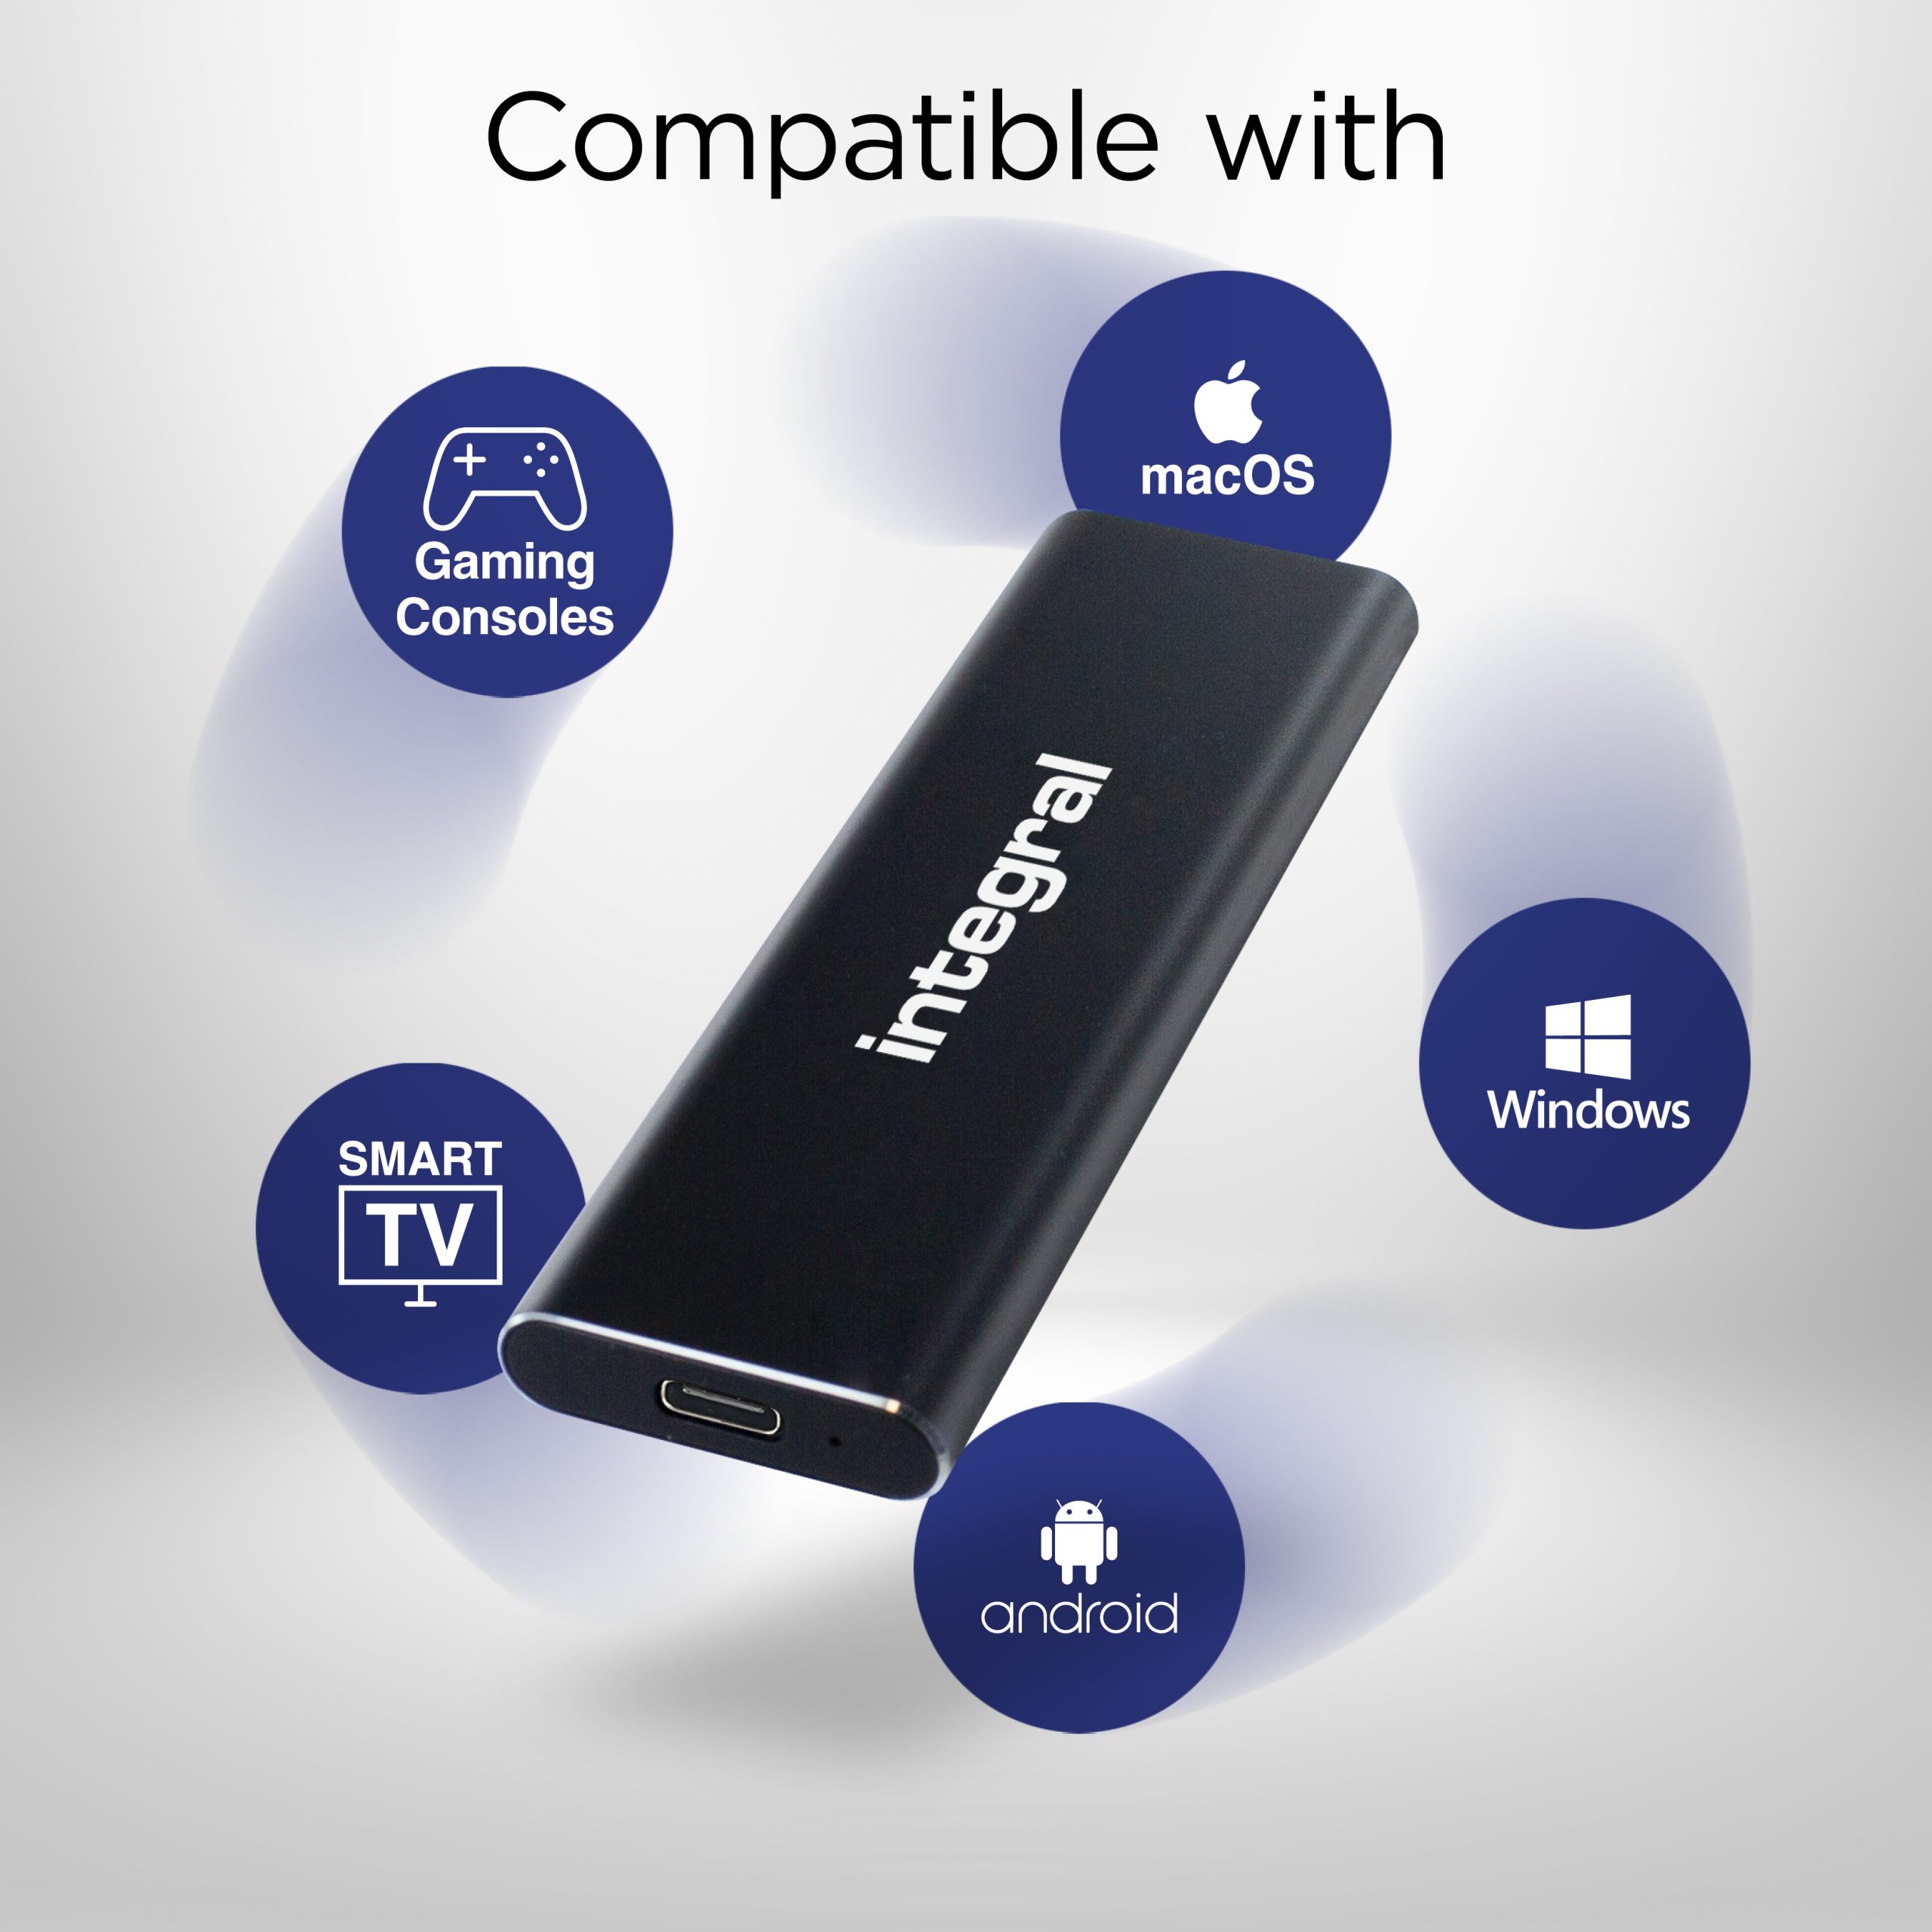 Portable SSD Compatibility Gaming Consoles macOS Windows Smart TVs Android and Windows